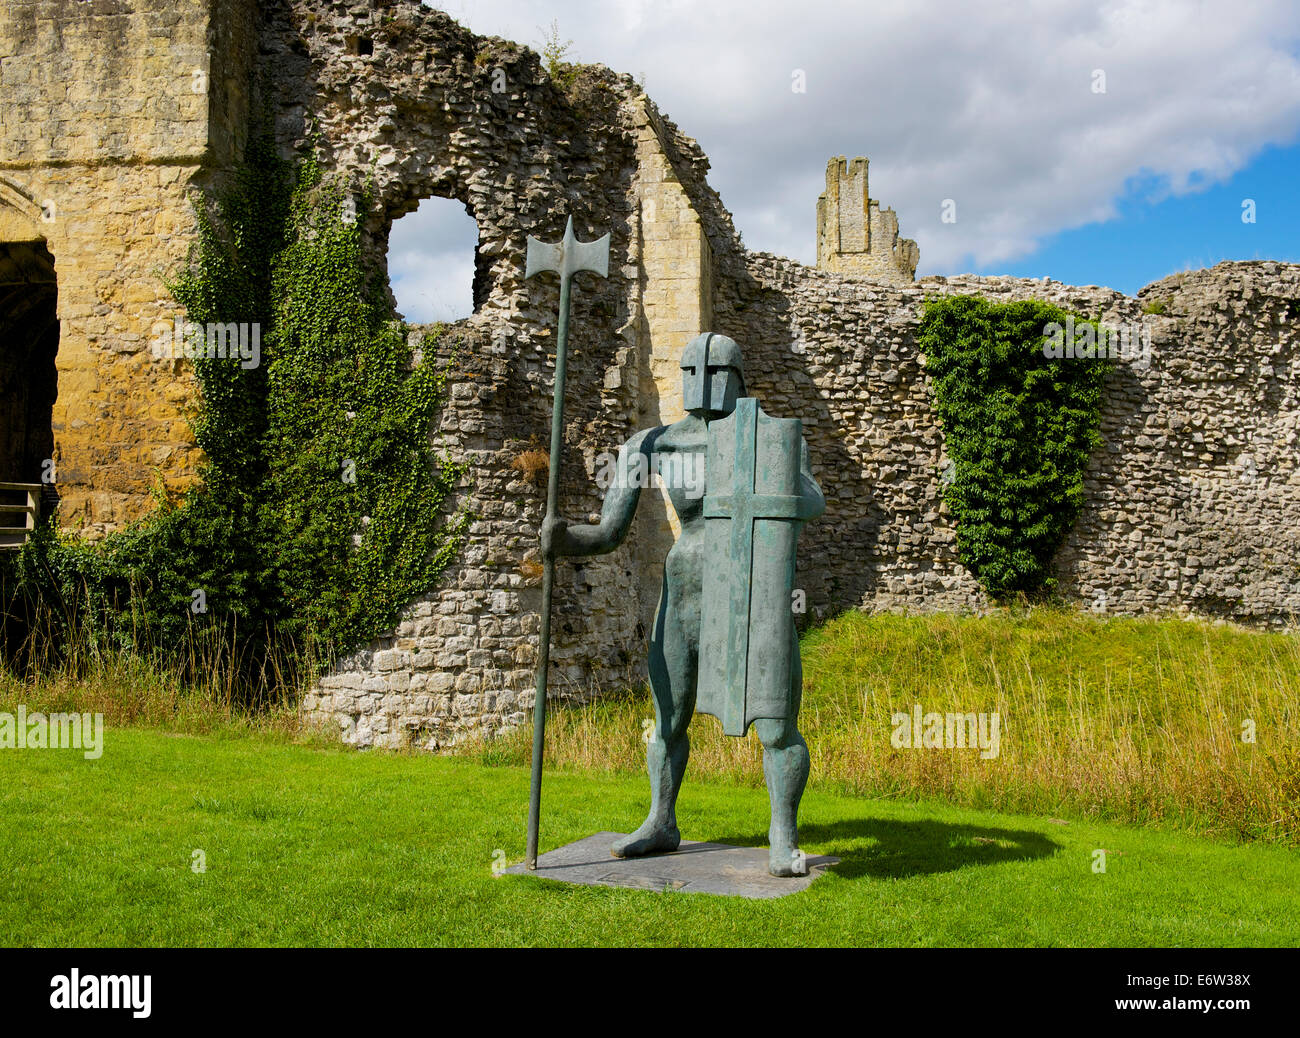 Warrior sculpture outside the castle, Helmsley, North Yorkshire, England UK Stock Photo